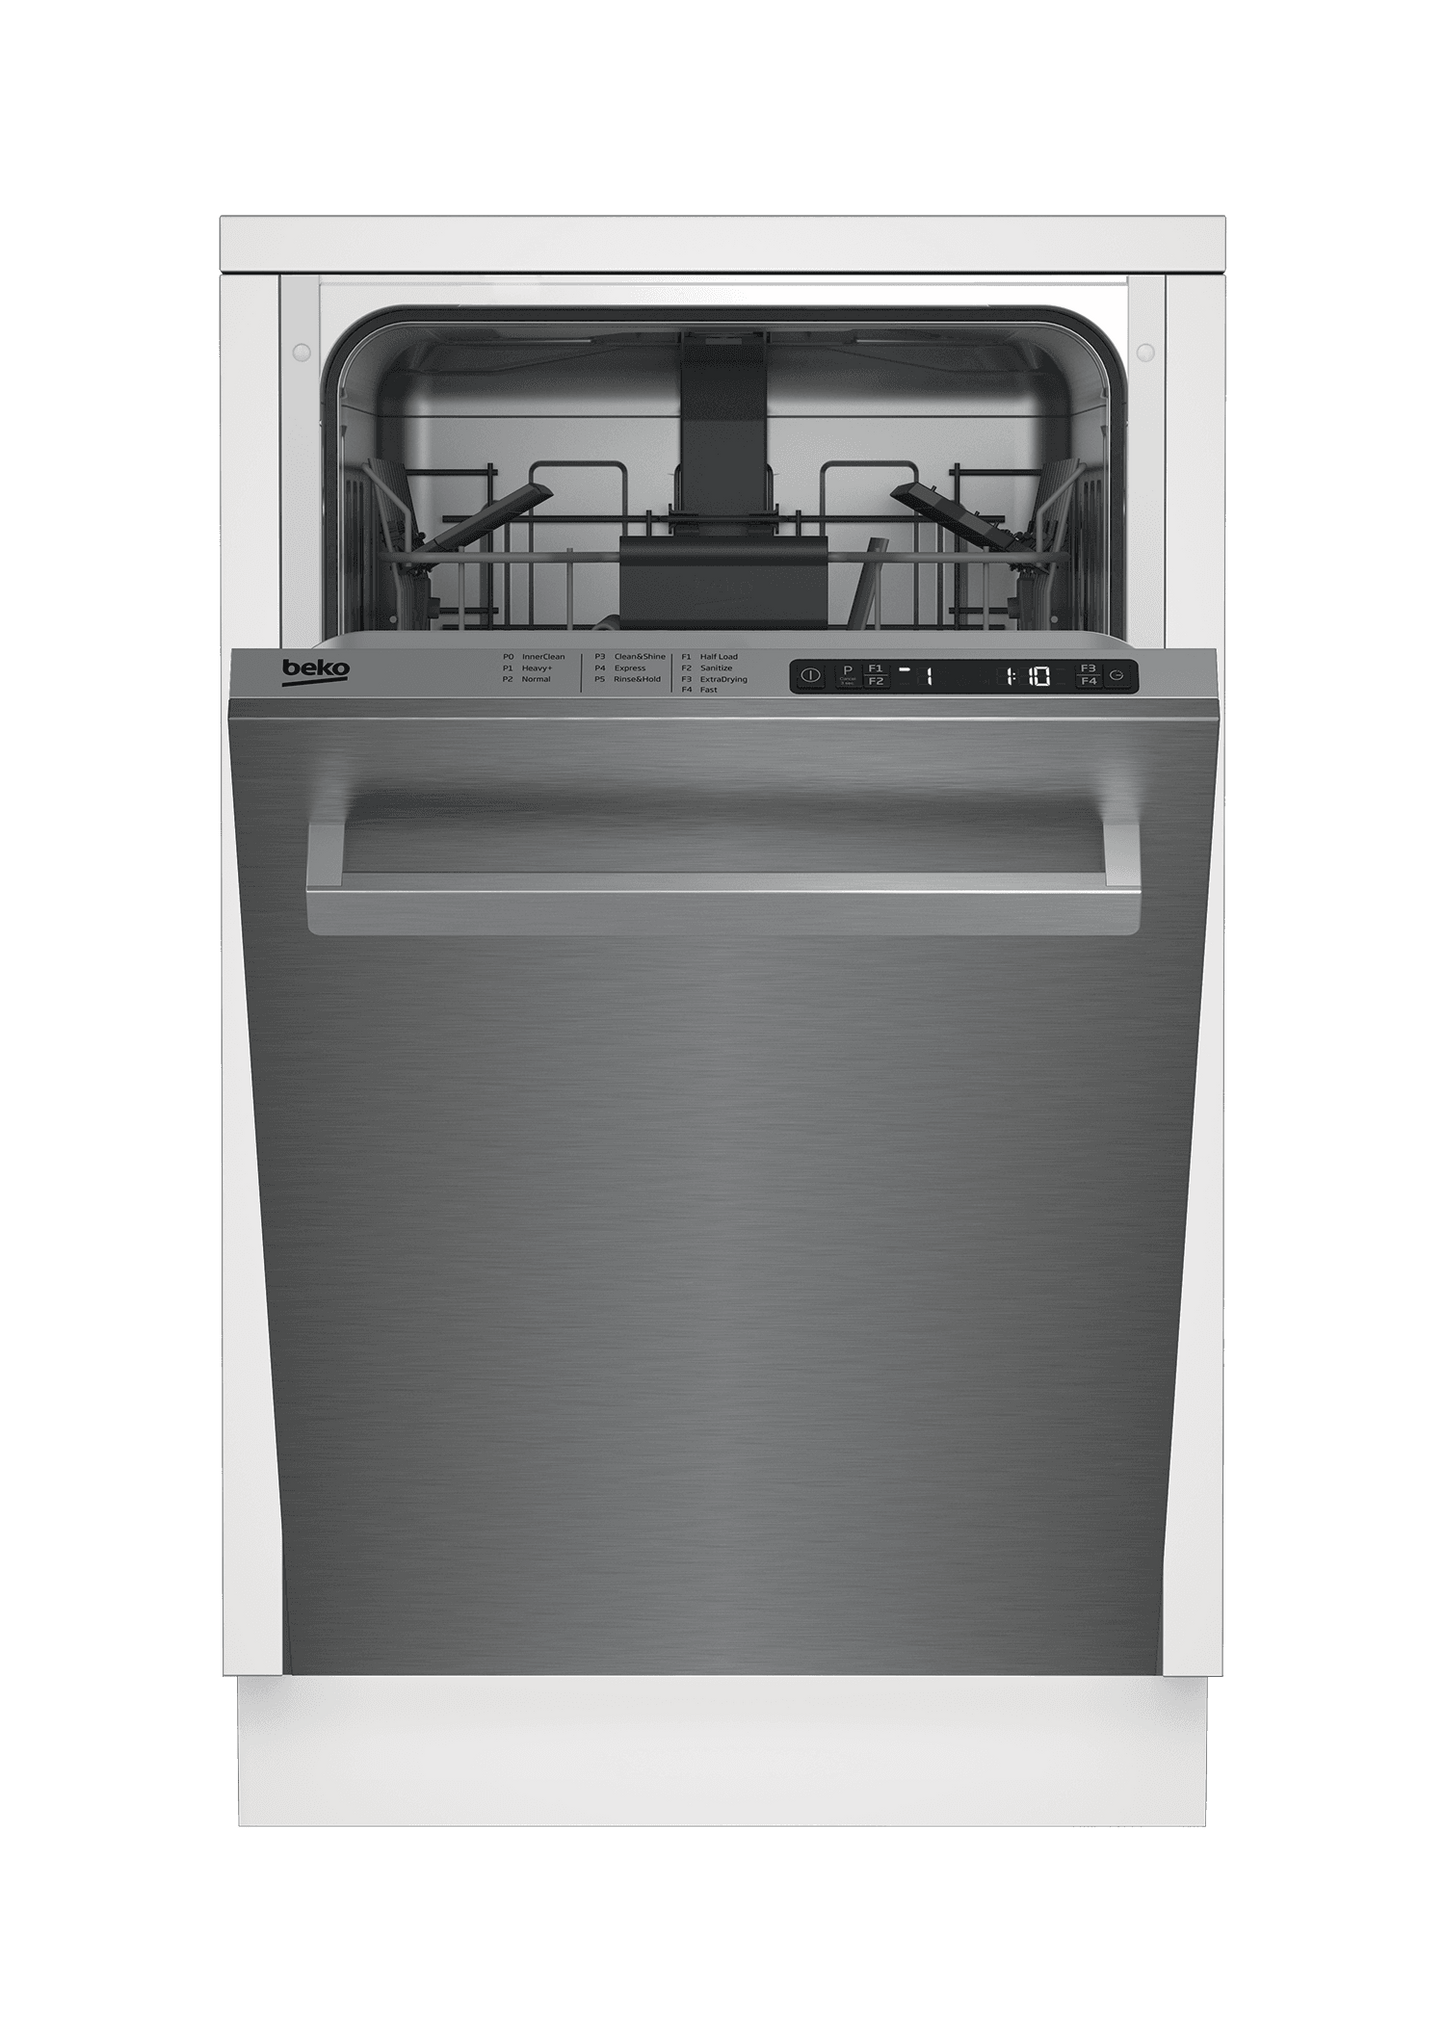 Beko DDS25842X Slim Size Stainless Dishwasher, 8 Place Settings, 48 Dba, Top Control